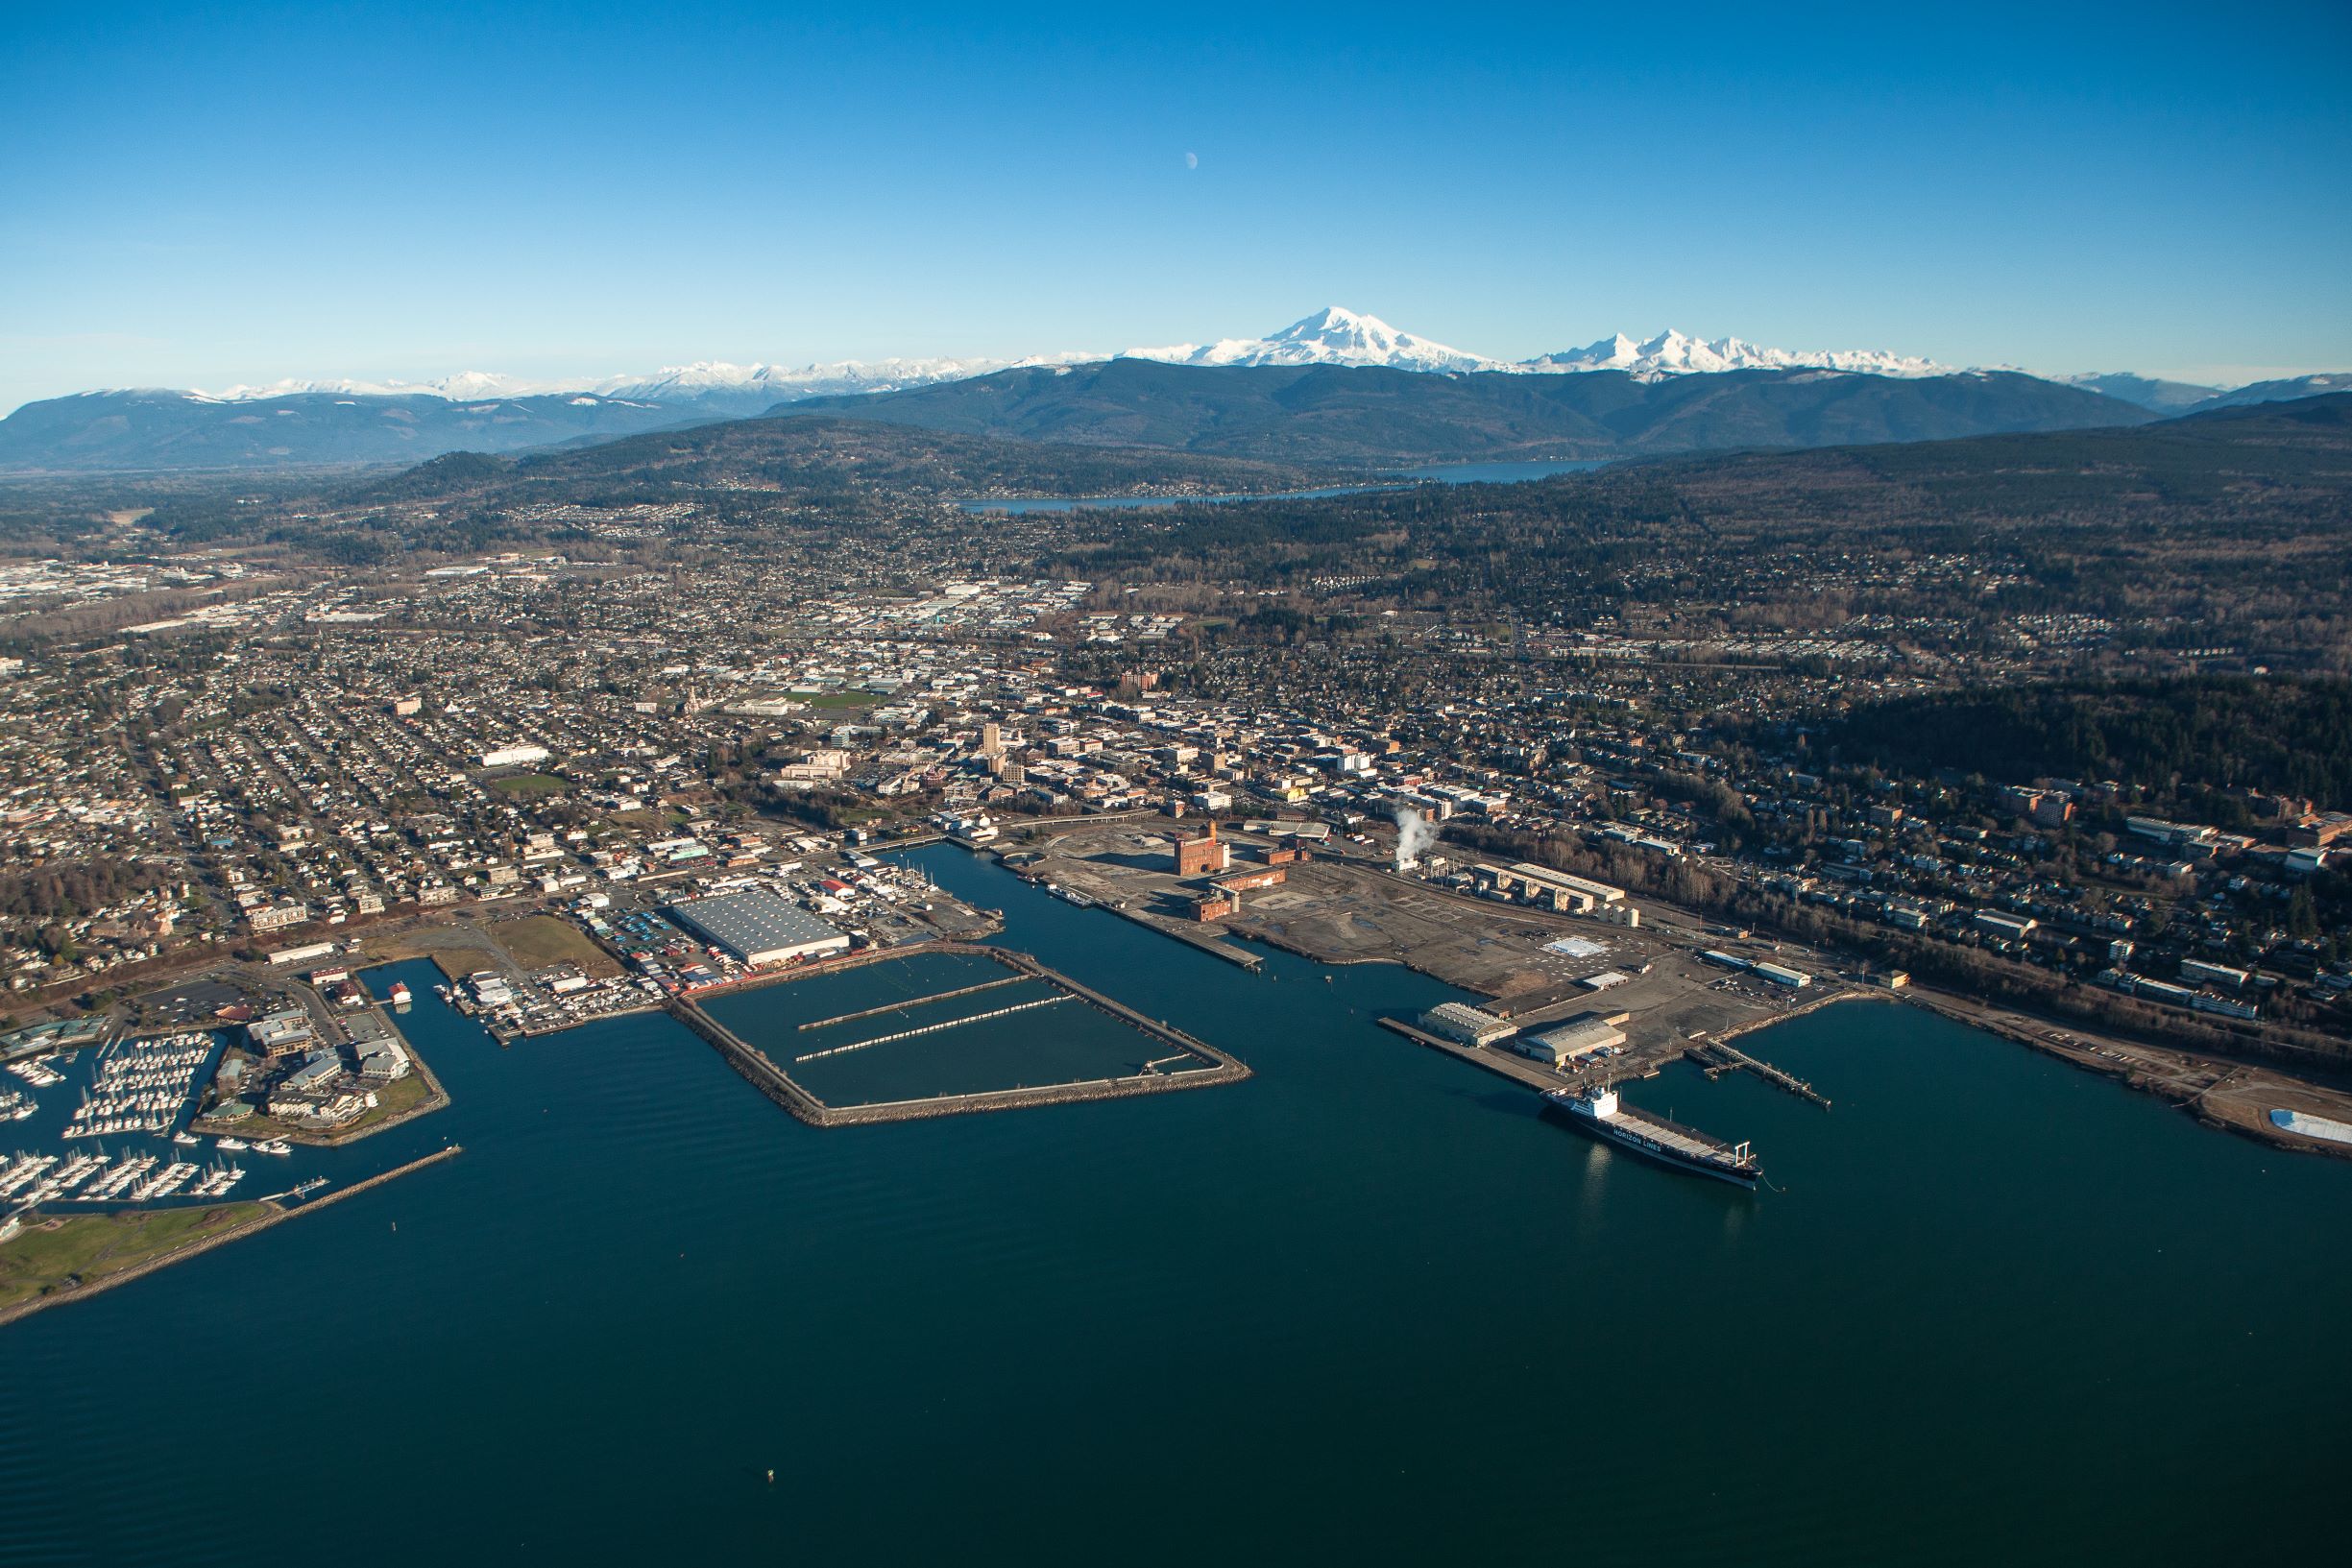 Bellingham Waterfront, December 2014. Photo courtesy of Nick Kelly / Public Domain